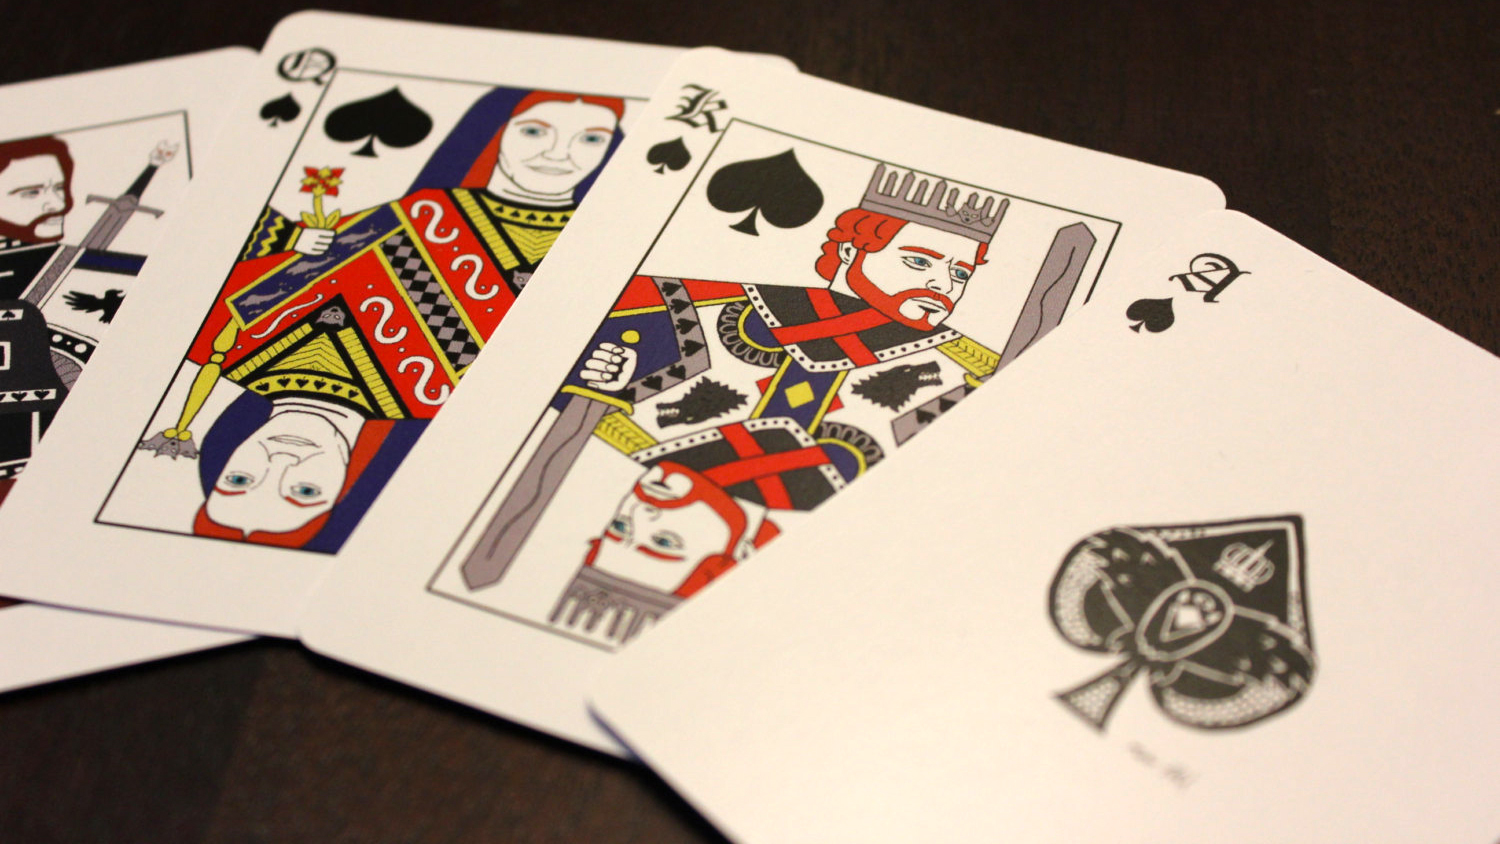 A Deck Of Cards Featuring Kings, Queens, And Other Characters From Game Of Thrones